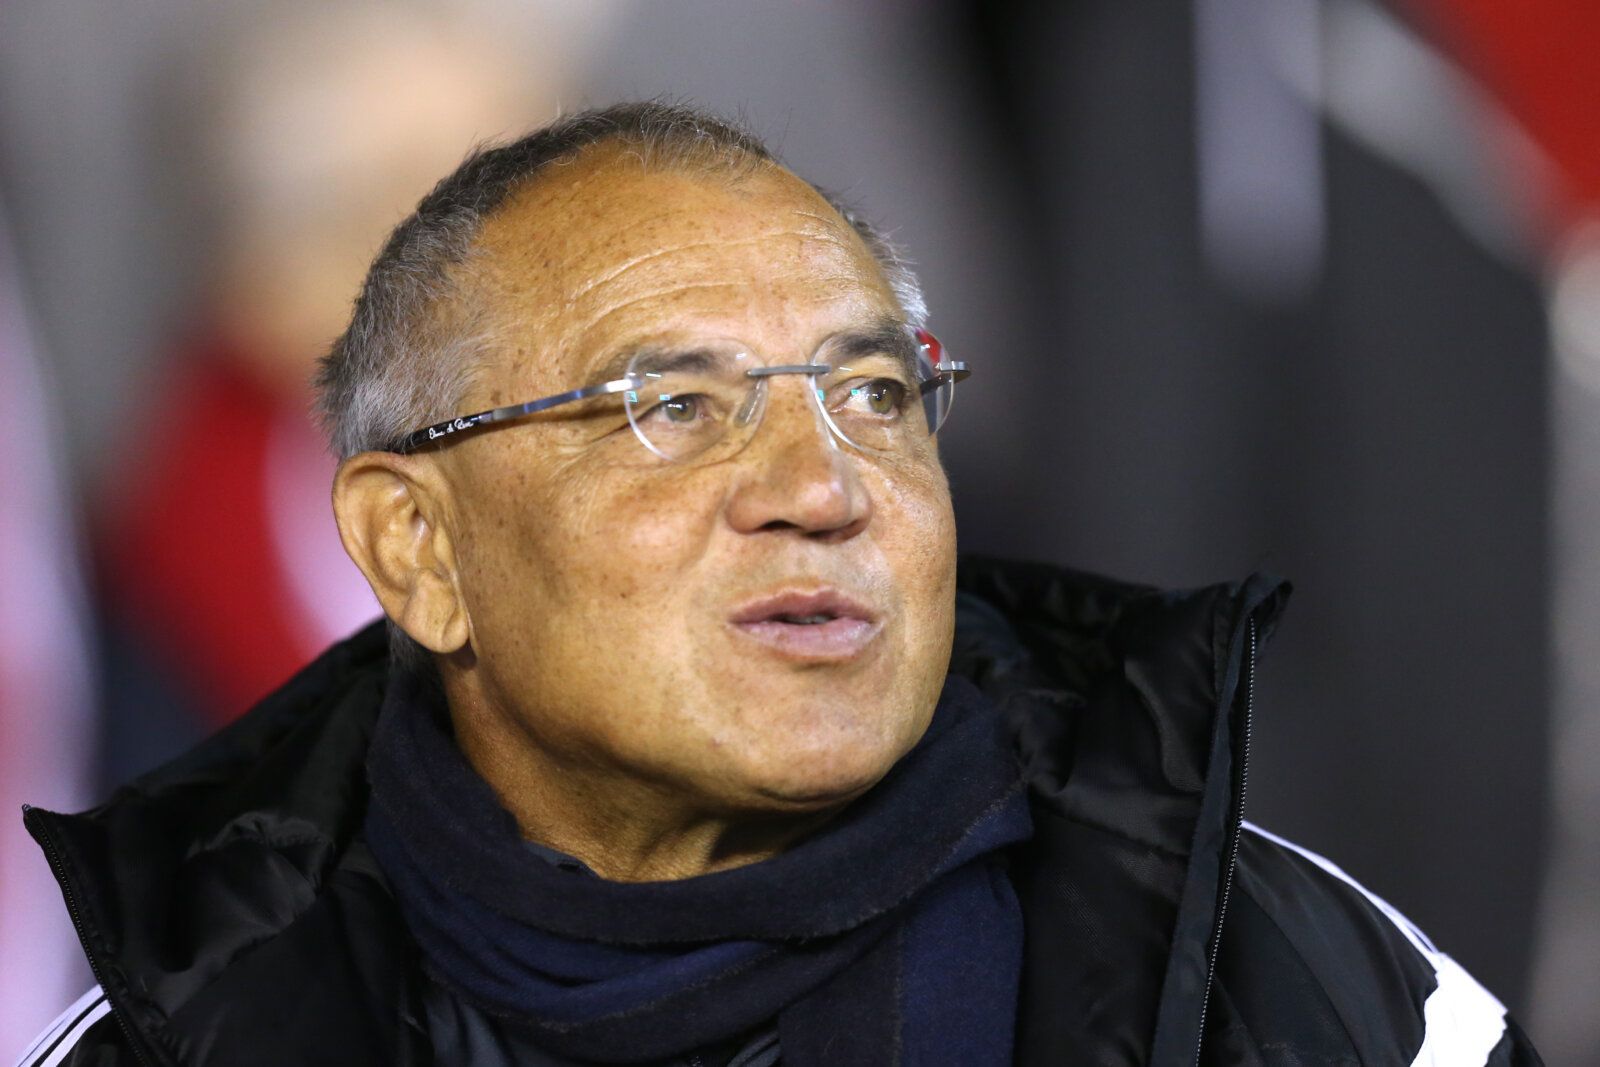 Football - Nottingham Forest v Fulham - Sky Bet Football League Championship - The City Ground - 14/15 - 17/9/14 
Fulham manager Felix Magath 
Mandatory Credit: Action Images / Peter Cziborra 
EDITORIAL USE ONLY. No use with unauthorized audio, video, data, fixture lists, club/league logos or 